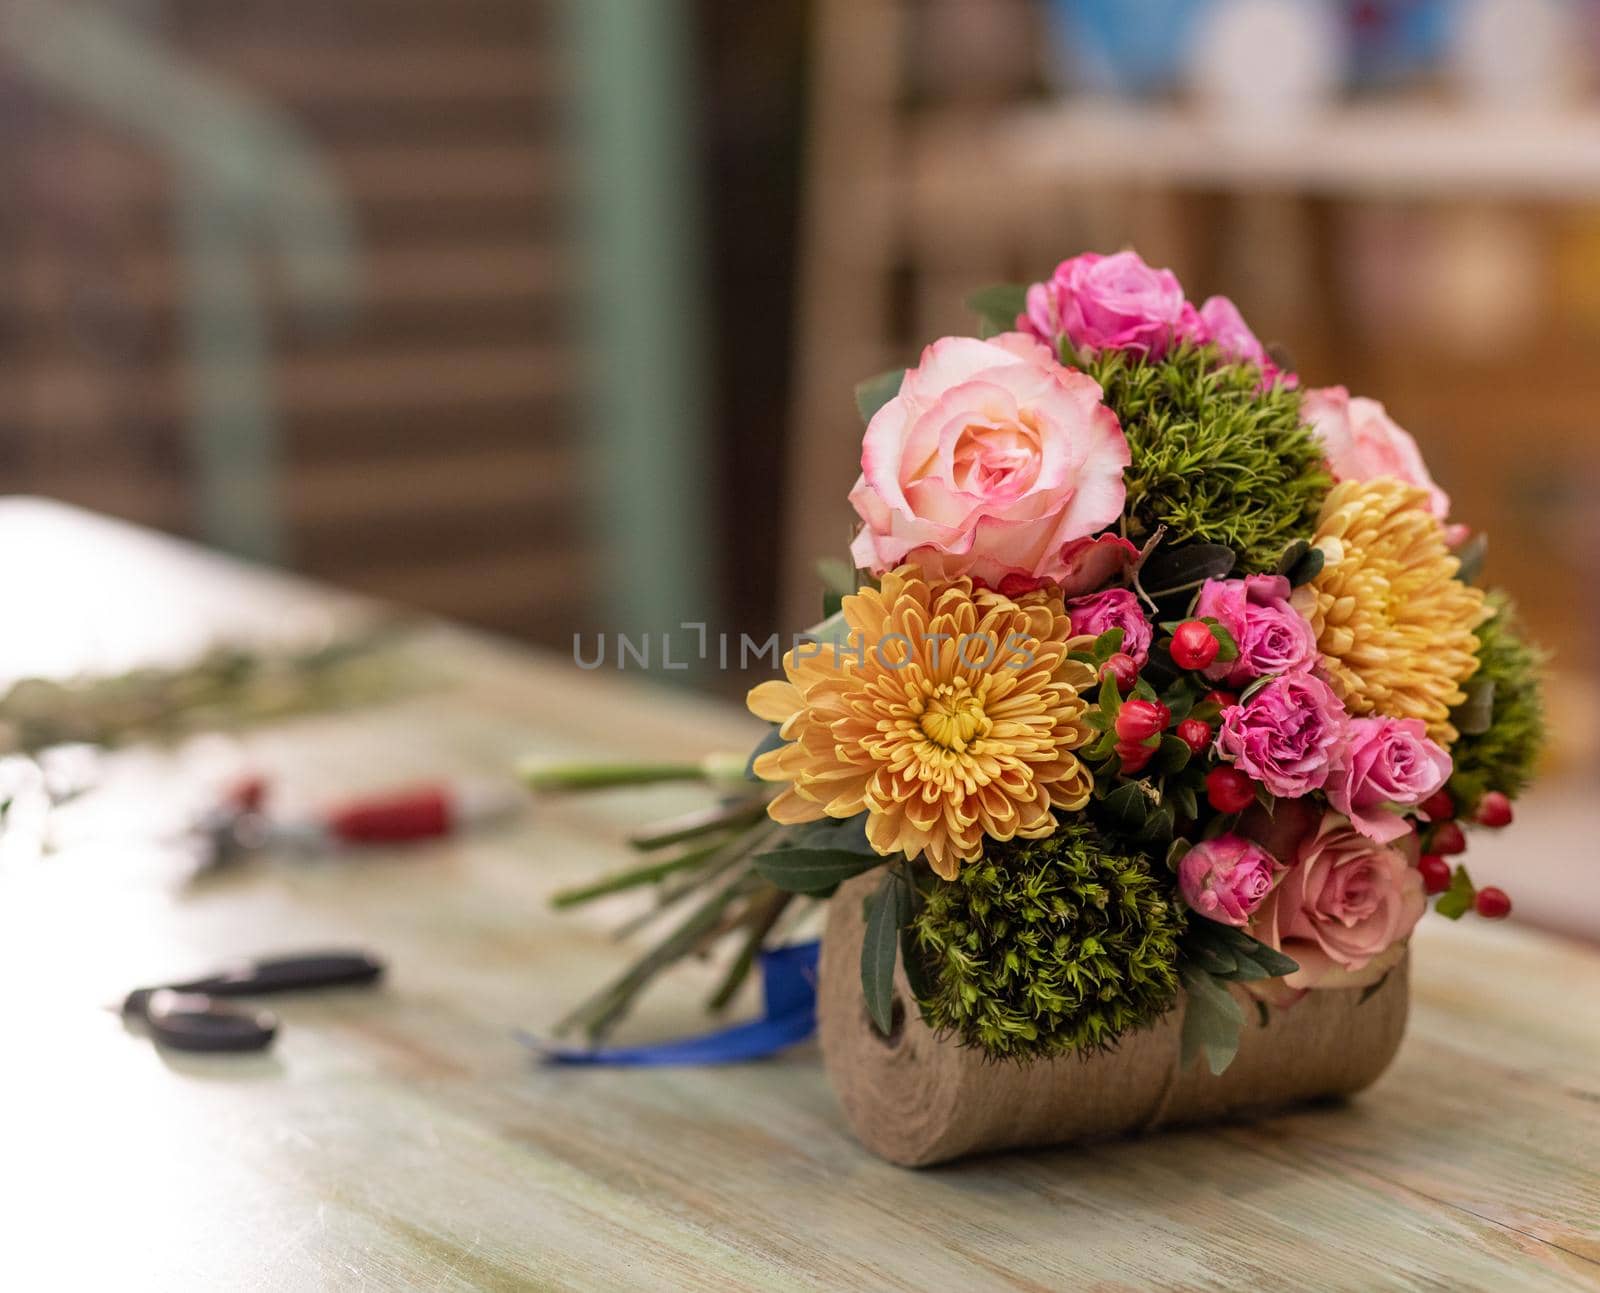 Beautiful flower bouquet in the table with bouquet florist equipments